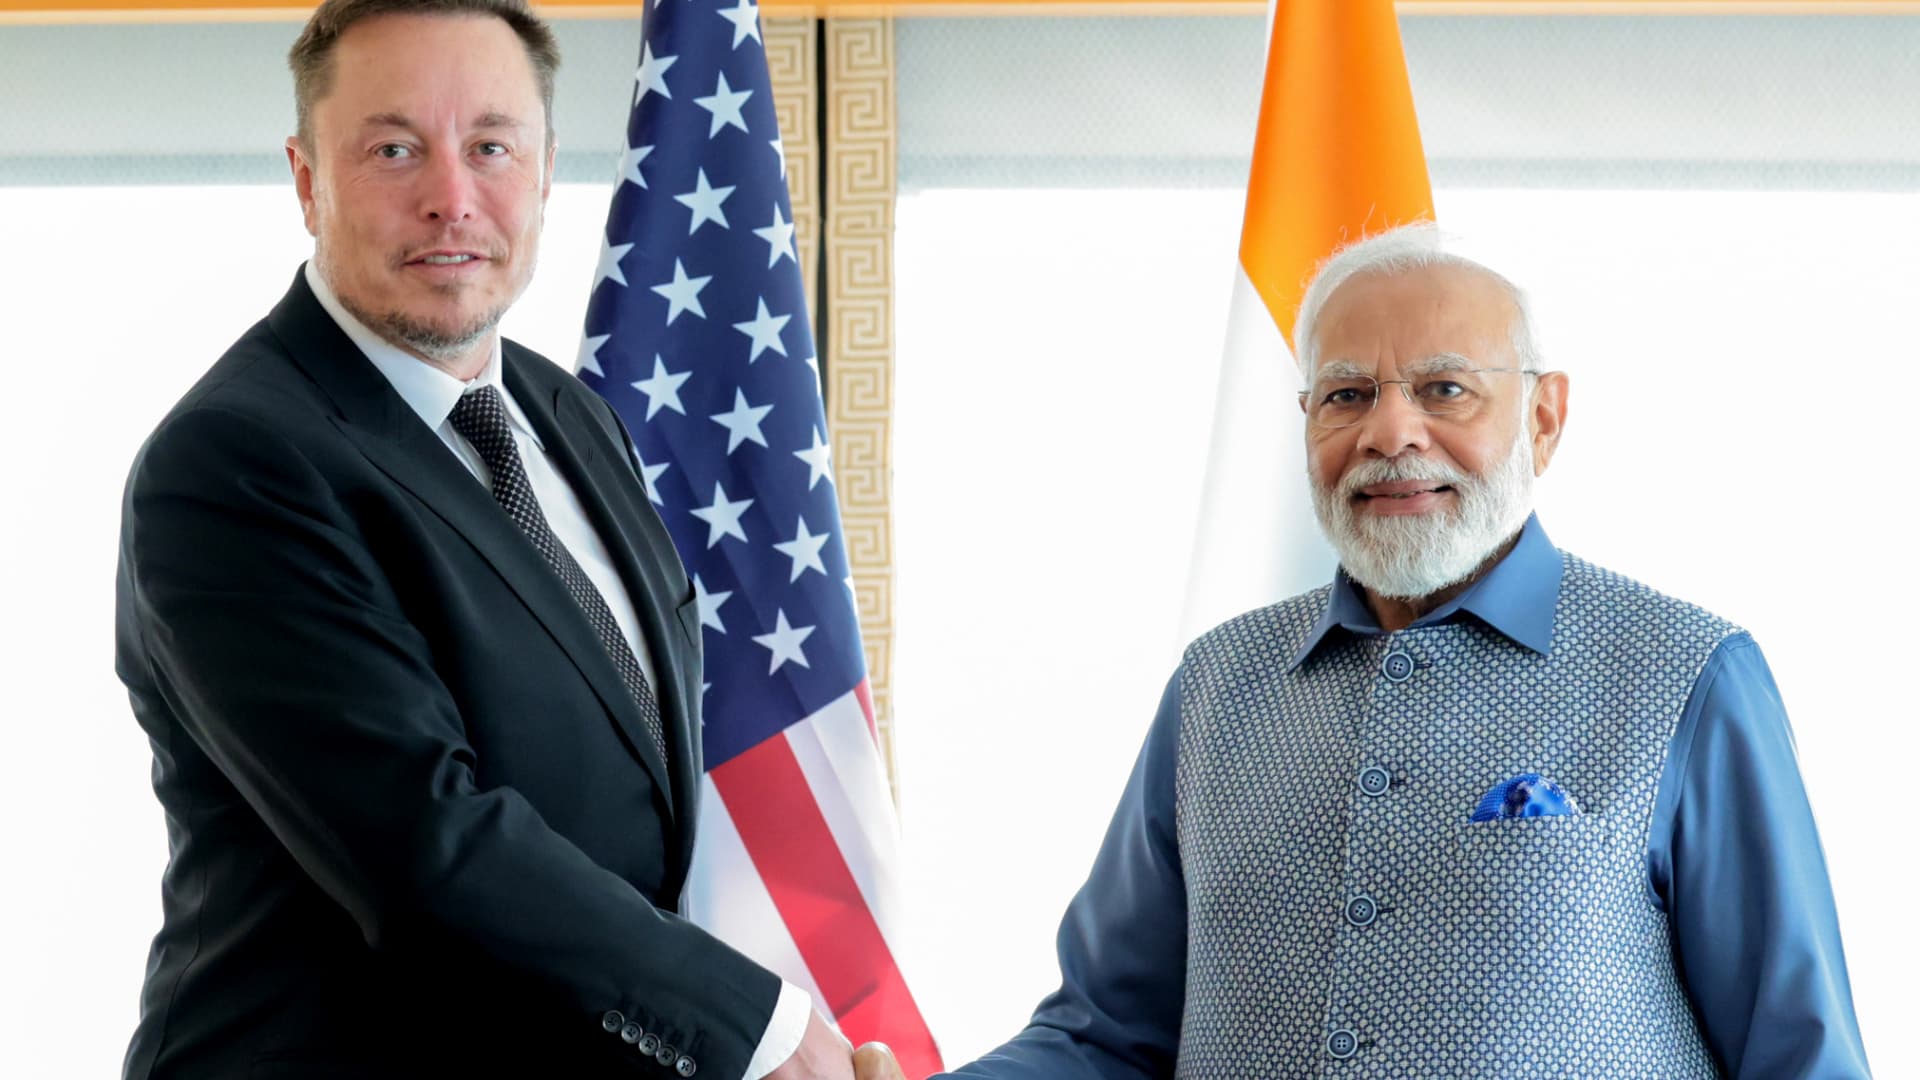 ‘I am a fan of Modi’: Elon Musk on his friendship with Indian Prime Minister Modi